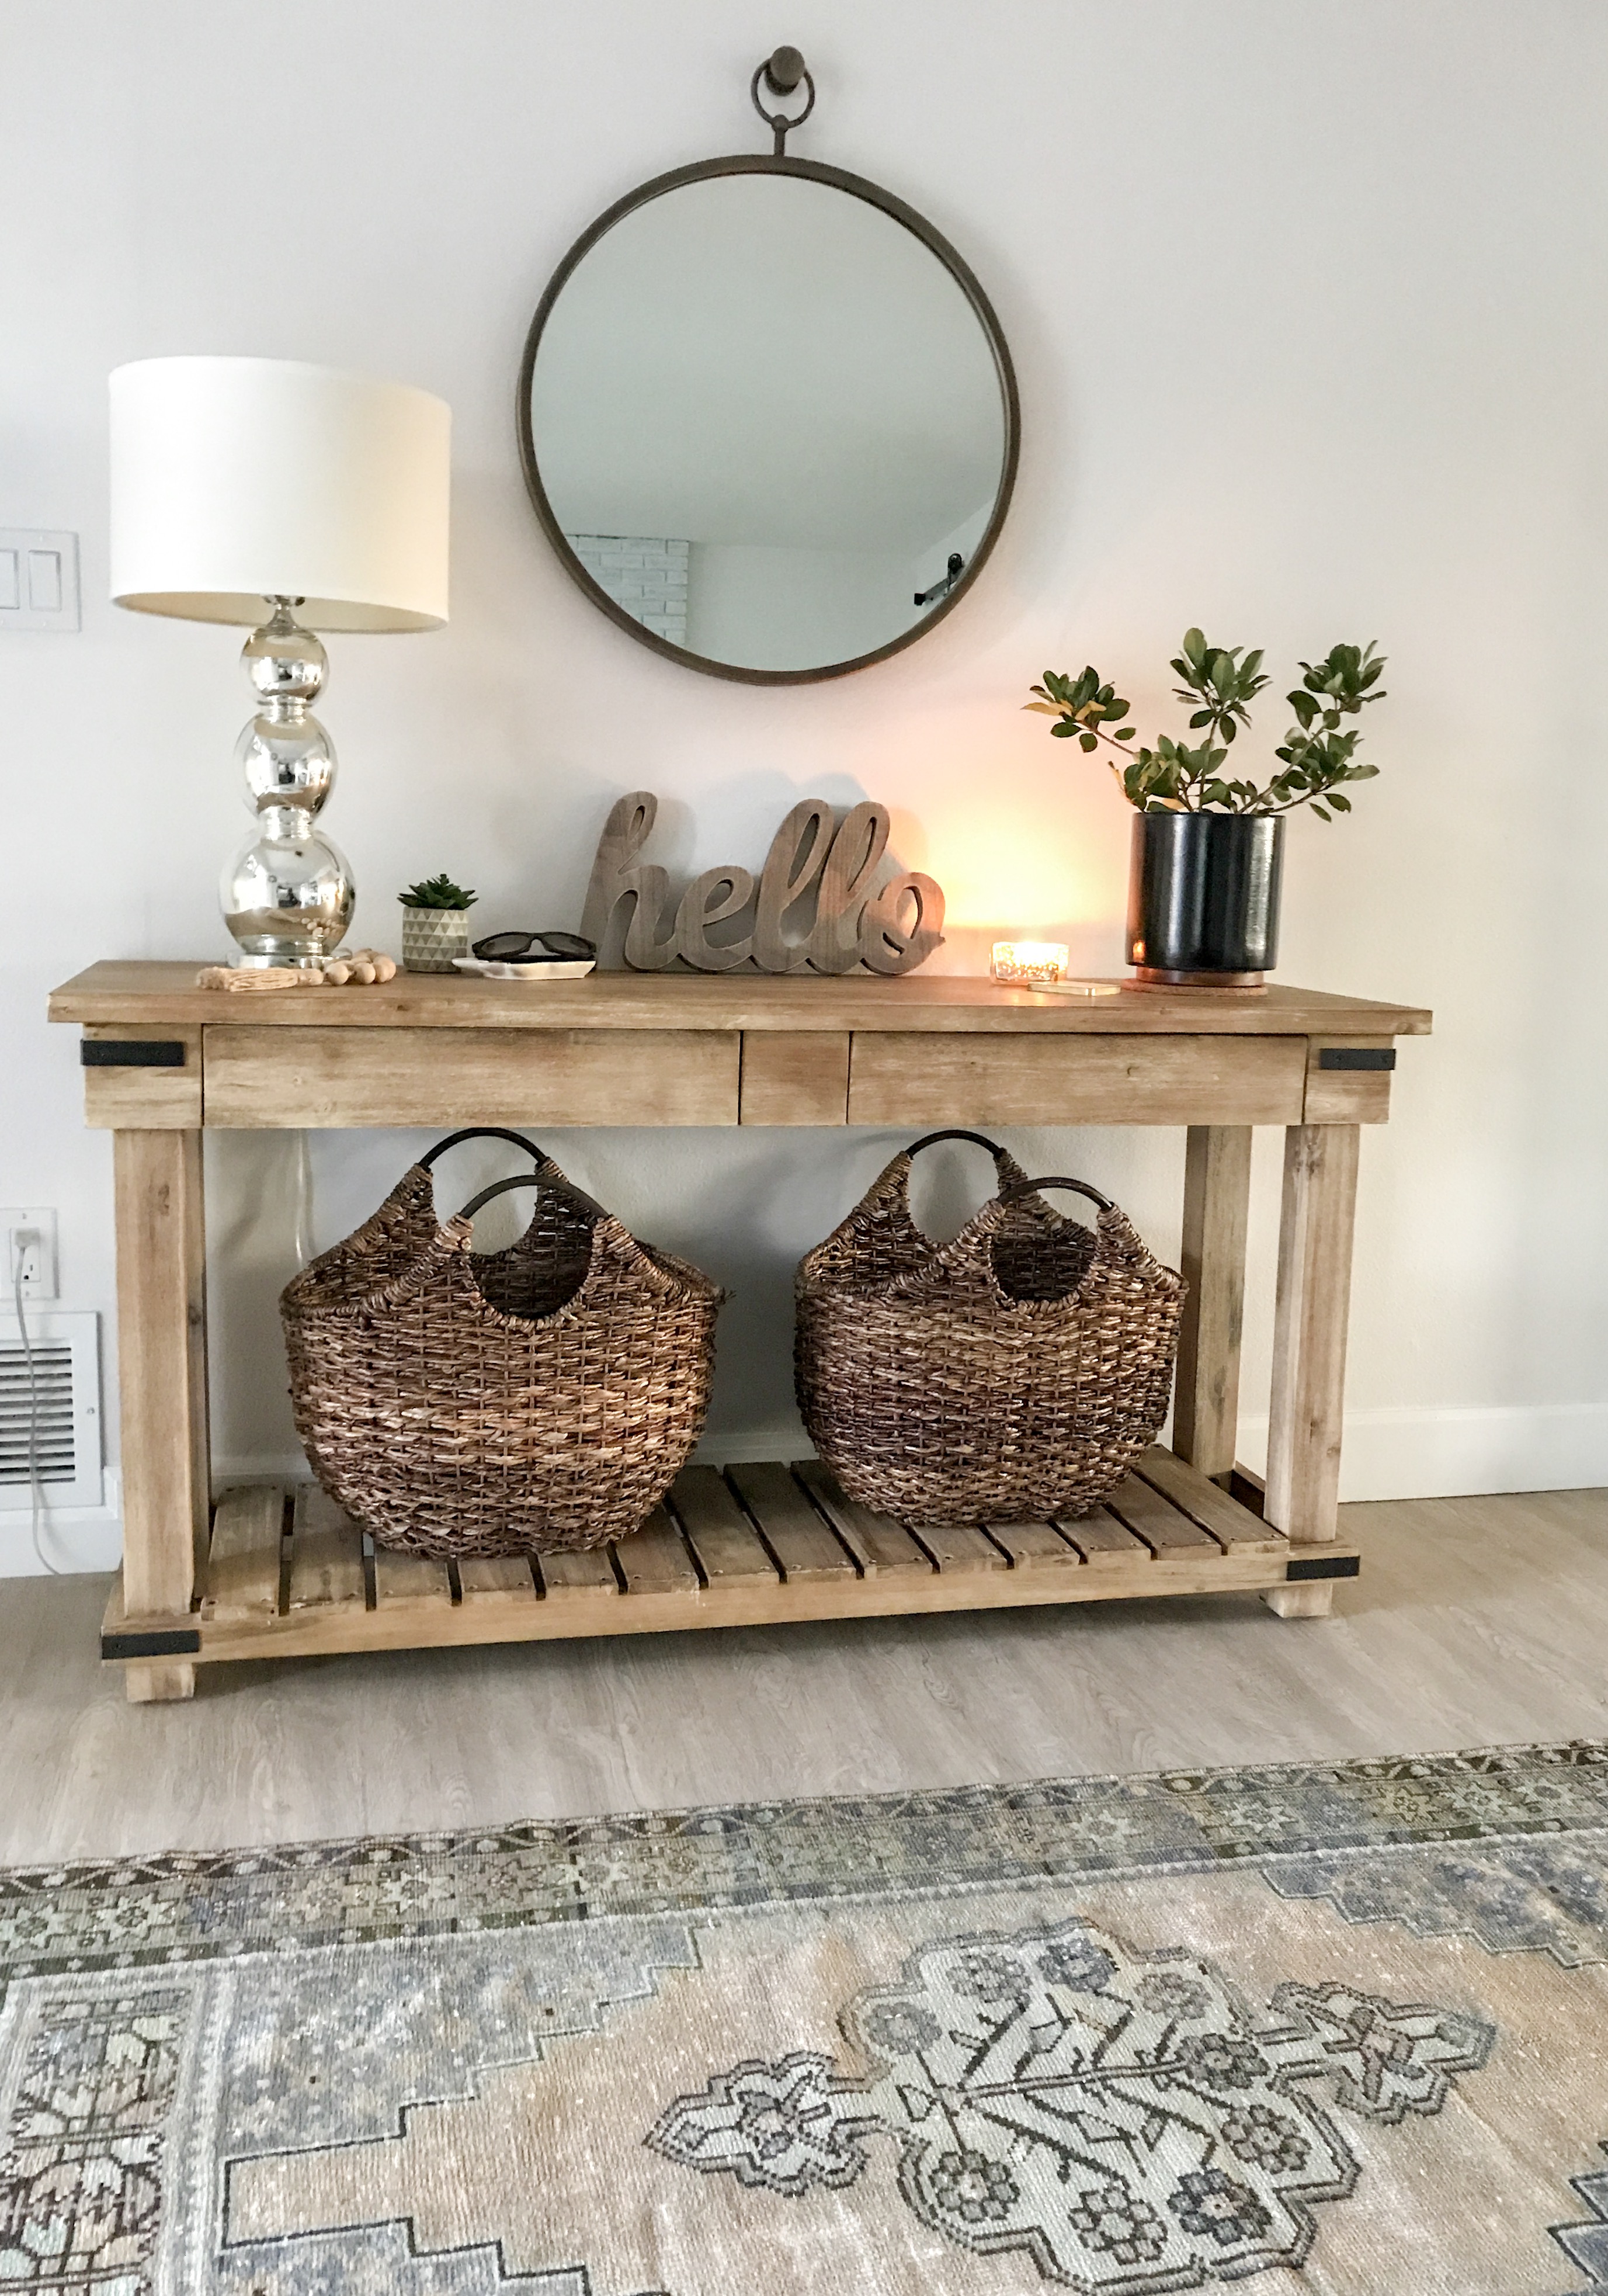 decor entryway fall simple welcome easy rug ways into greenery ig cozy candle listed elements texture ve 1111lightlane